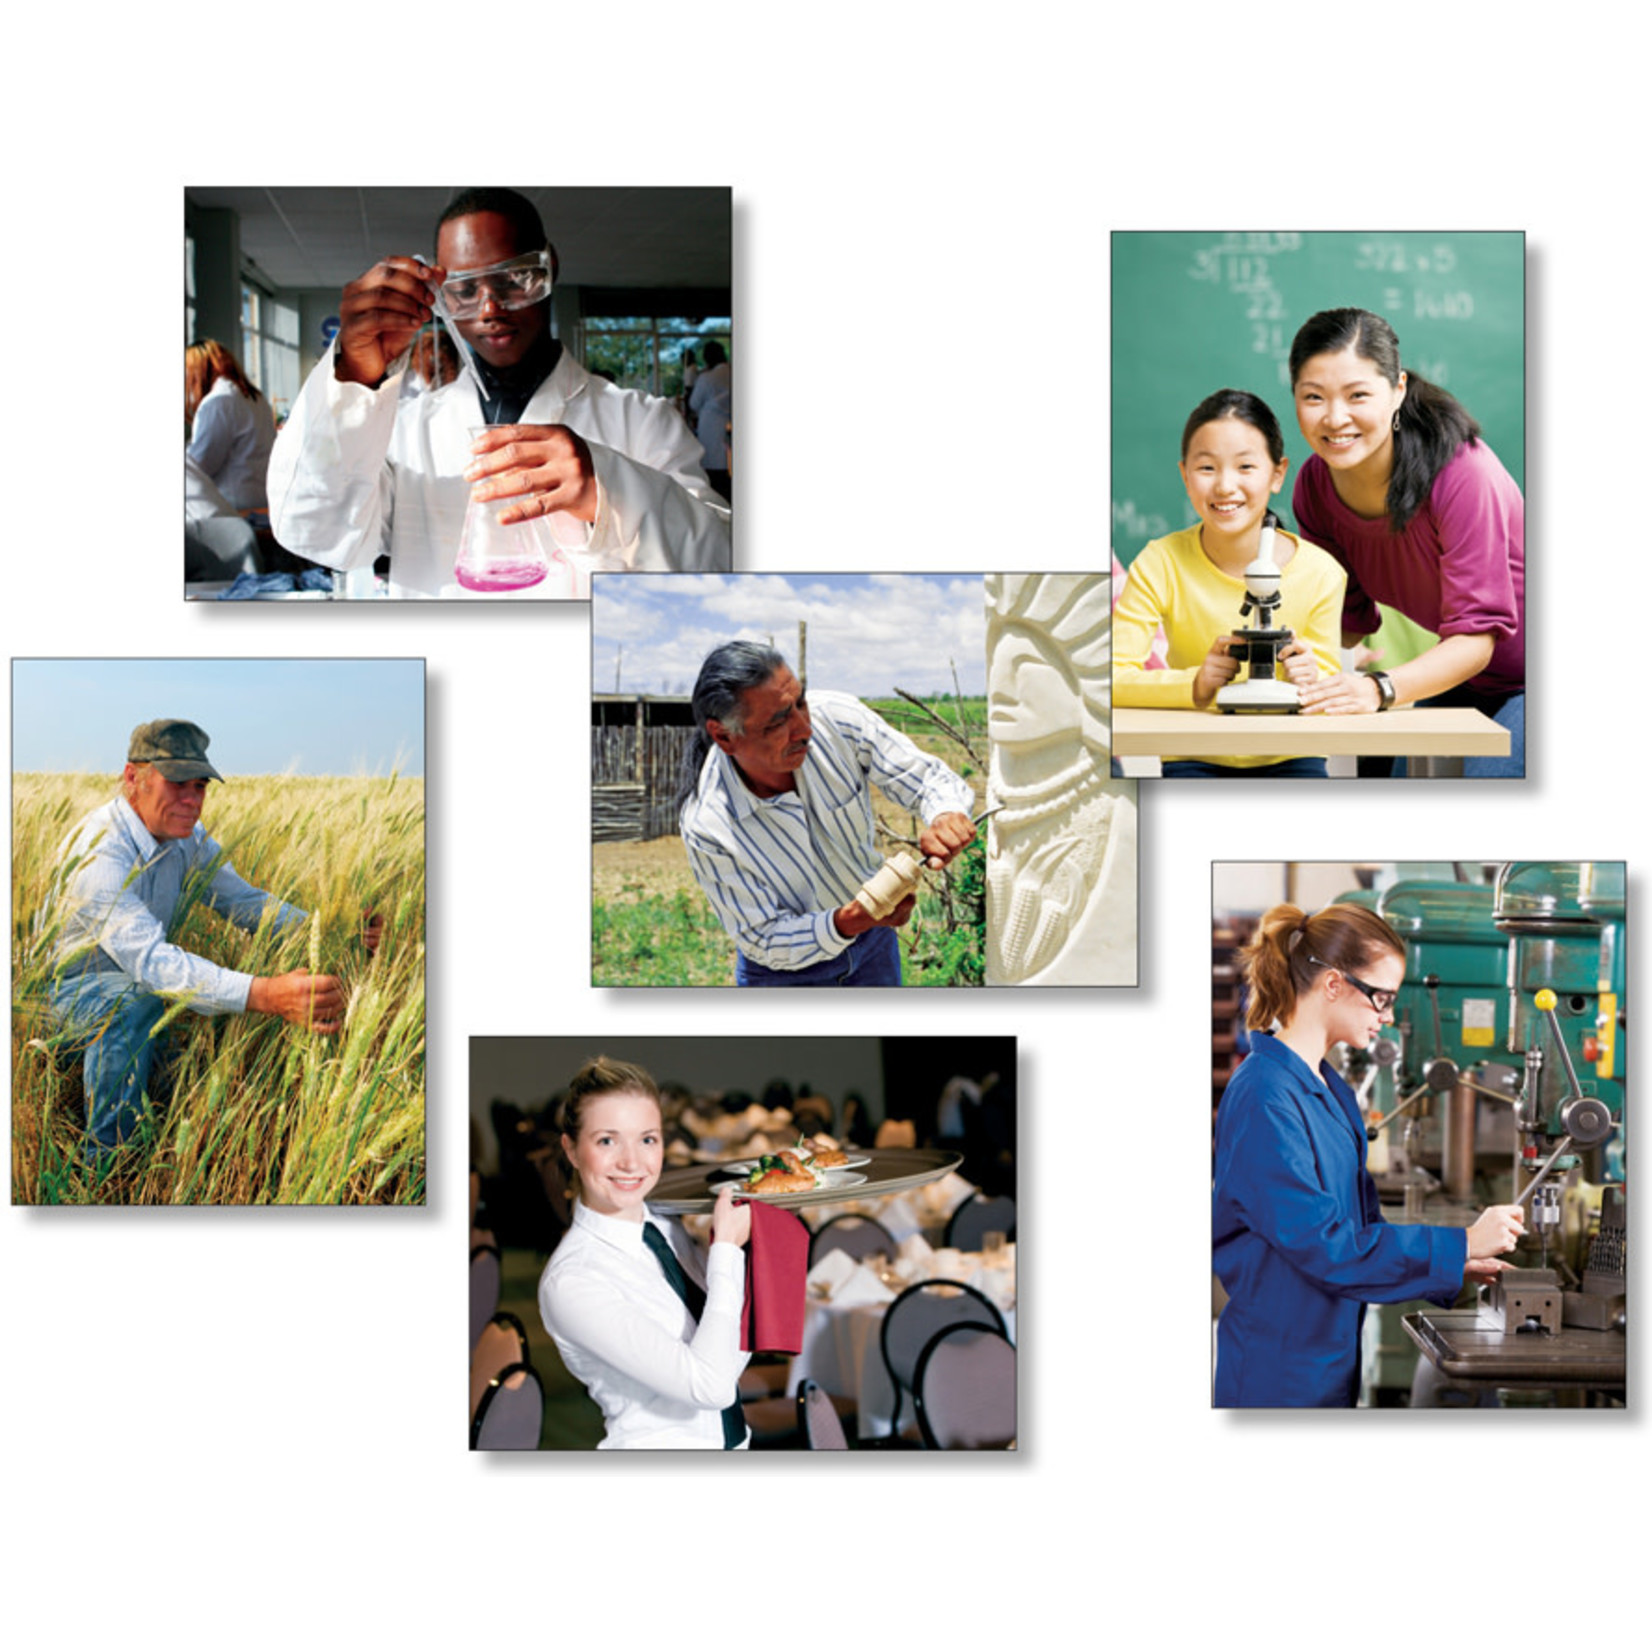 NORTH STAR TEACHER RESOURCES Occupations & Careers Photo Photo Language Cards